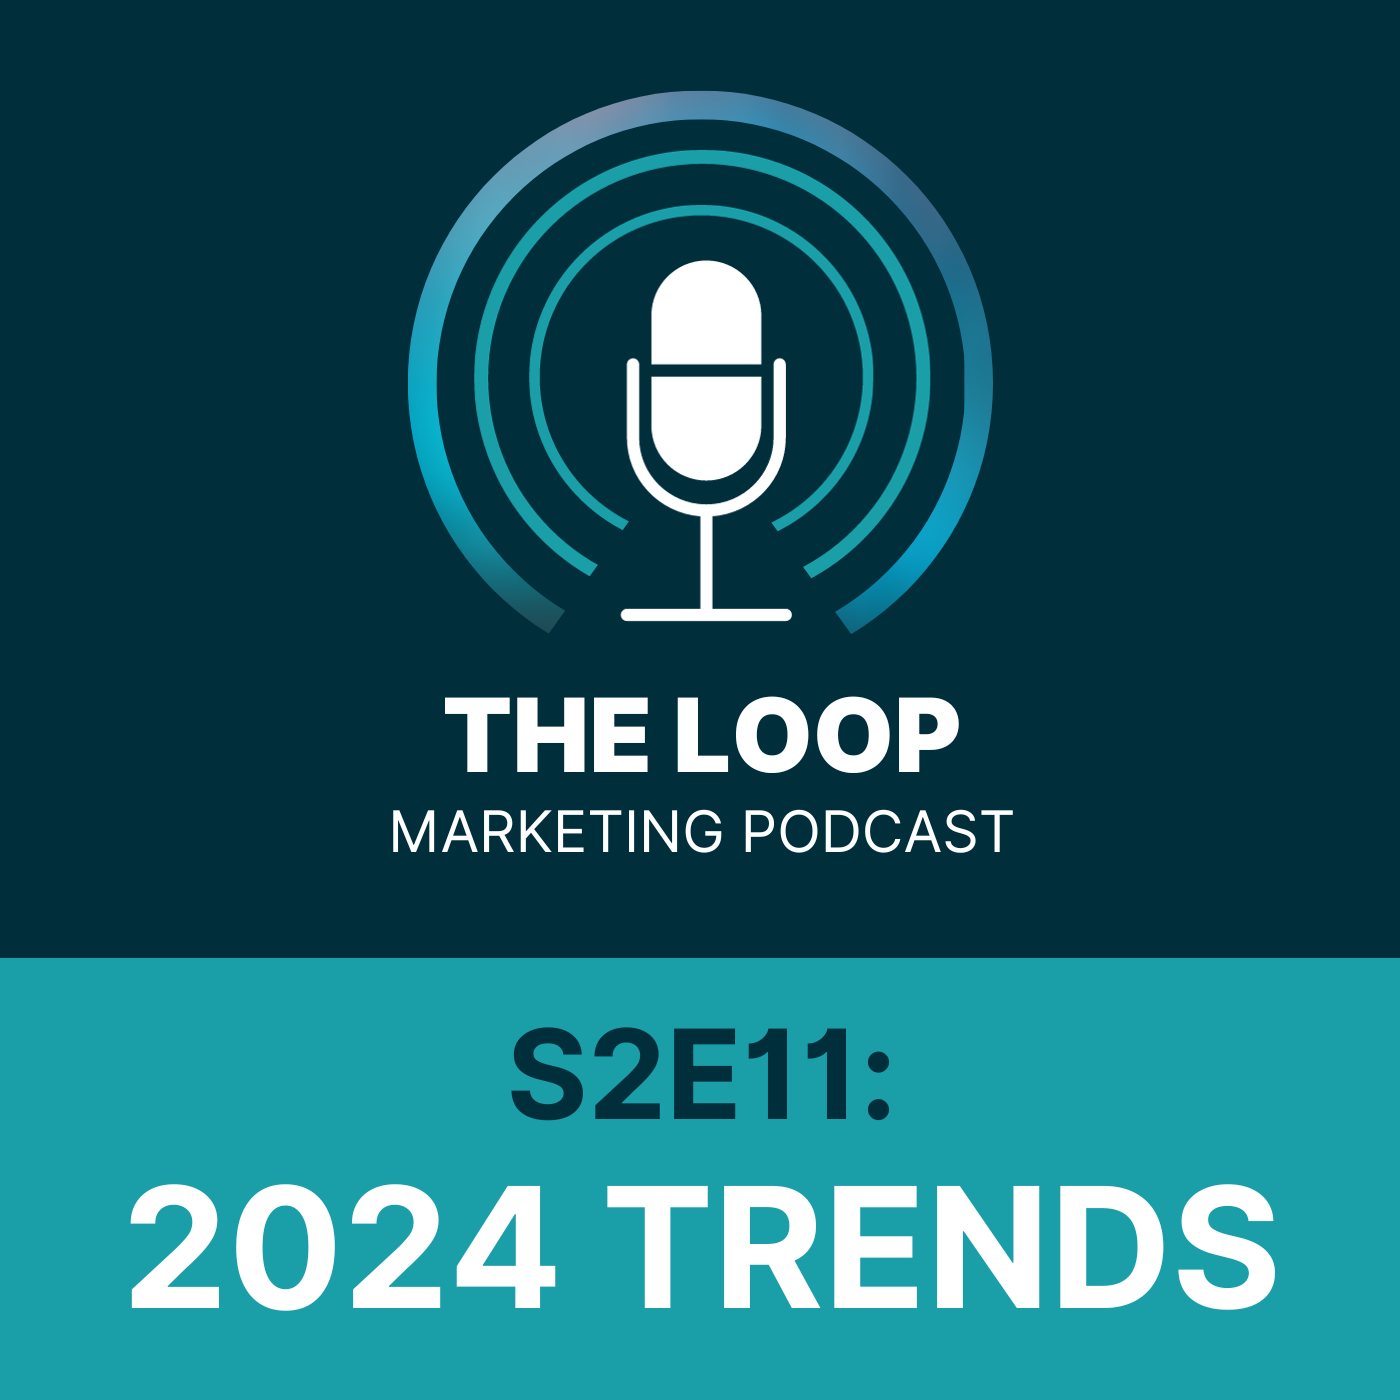 2024 Marketing Trends Predictions | The Loop Marketing Podcast